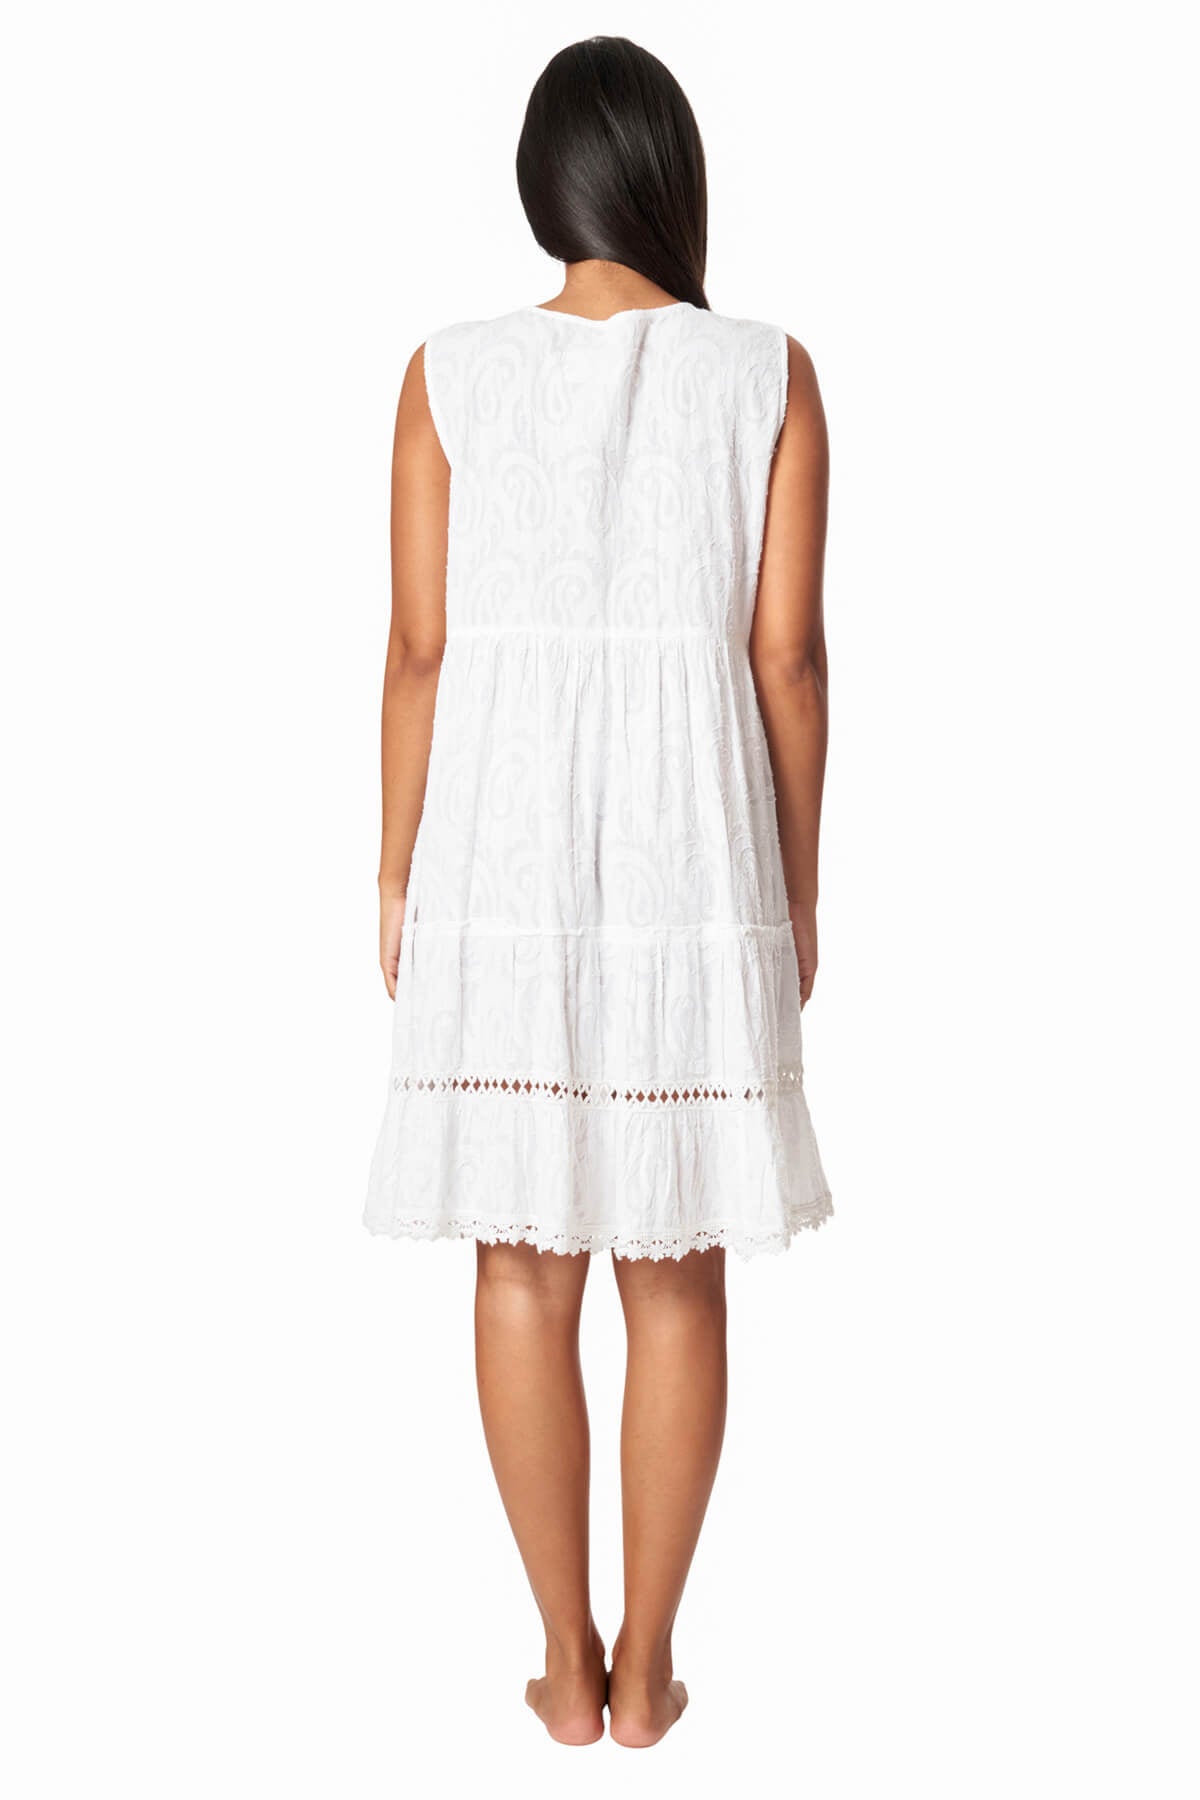 Finley White Solid Beaded Mini Cover Up Dress